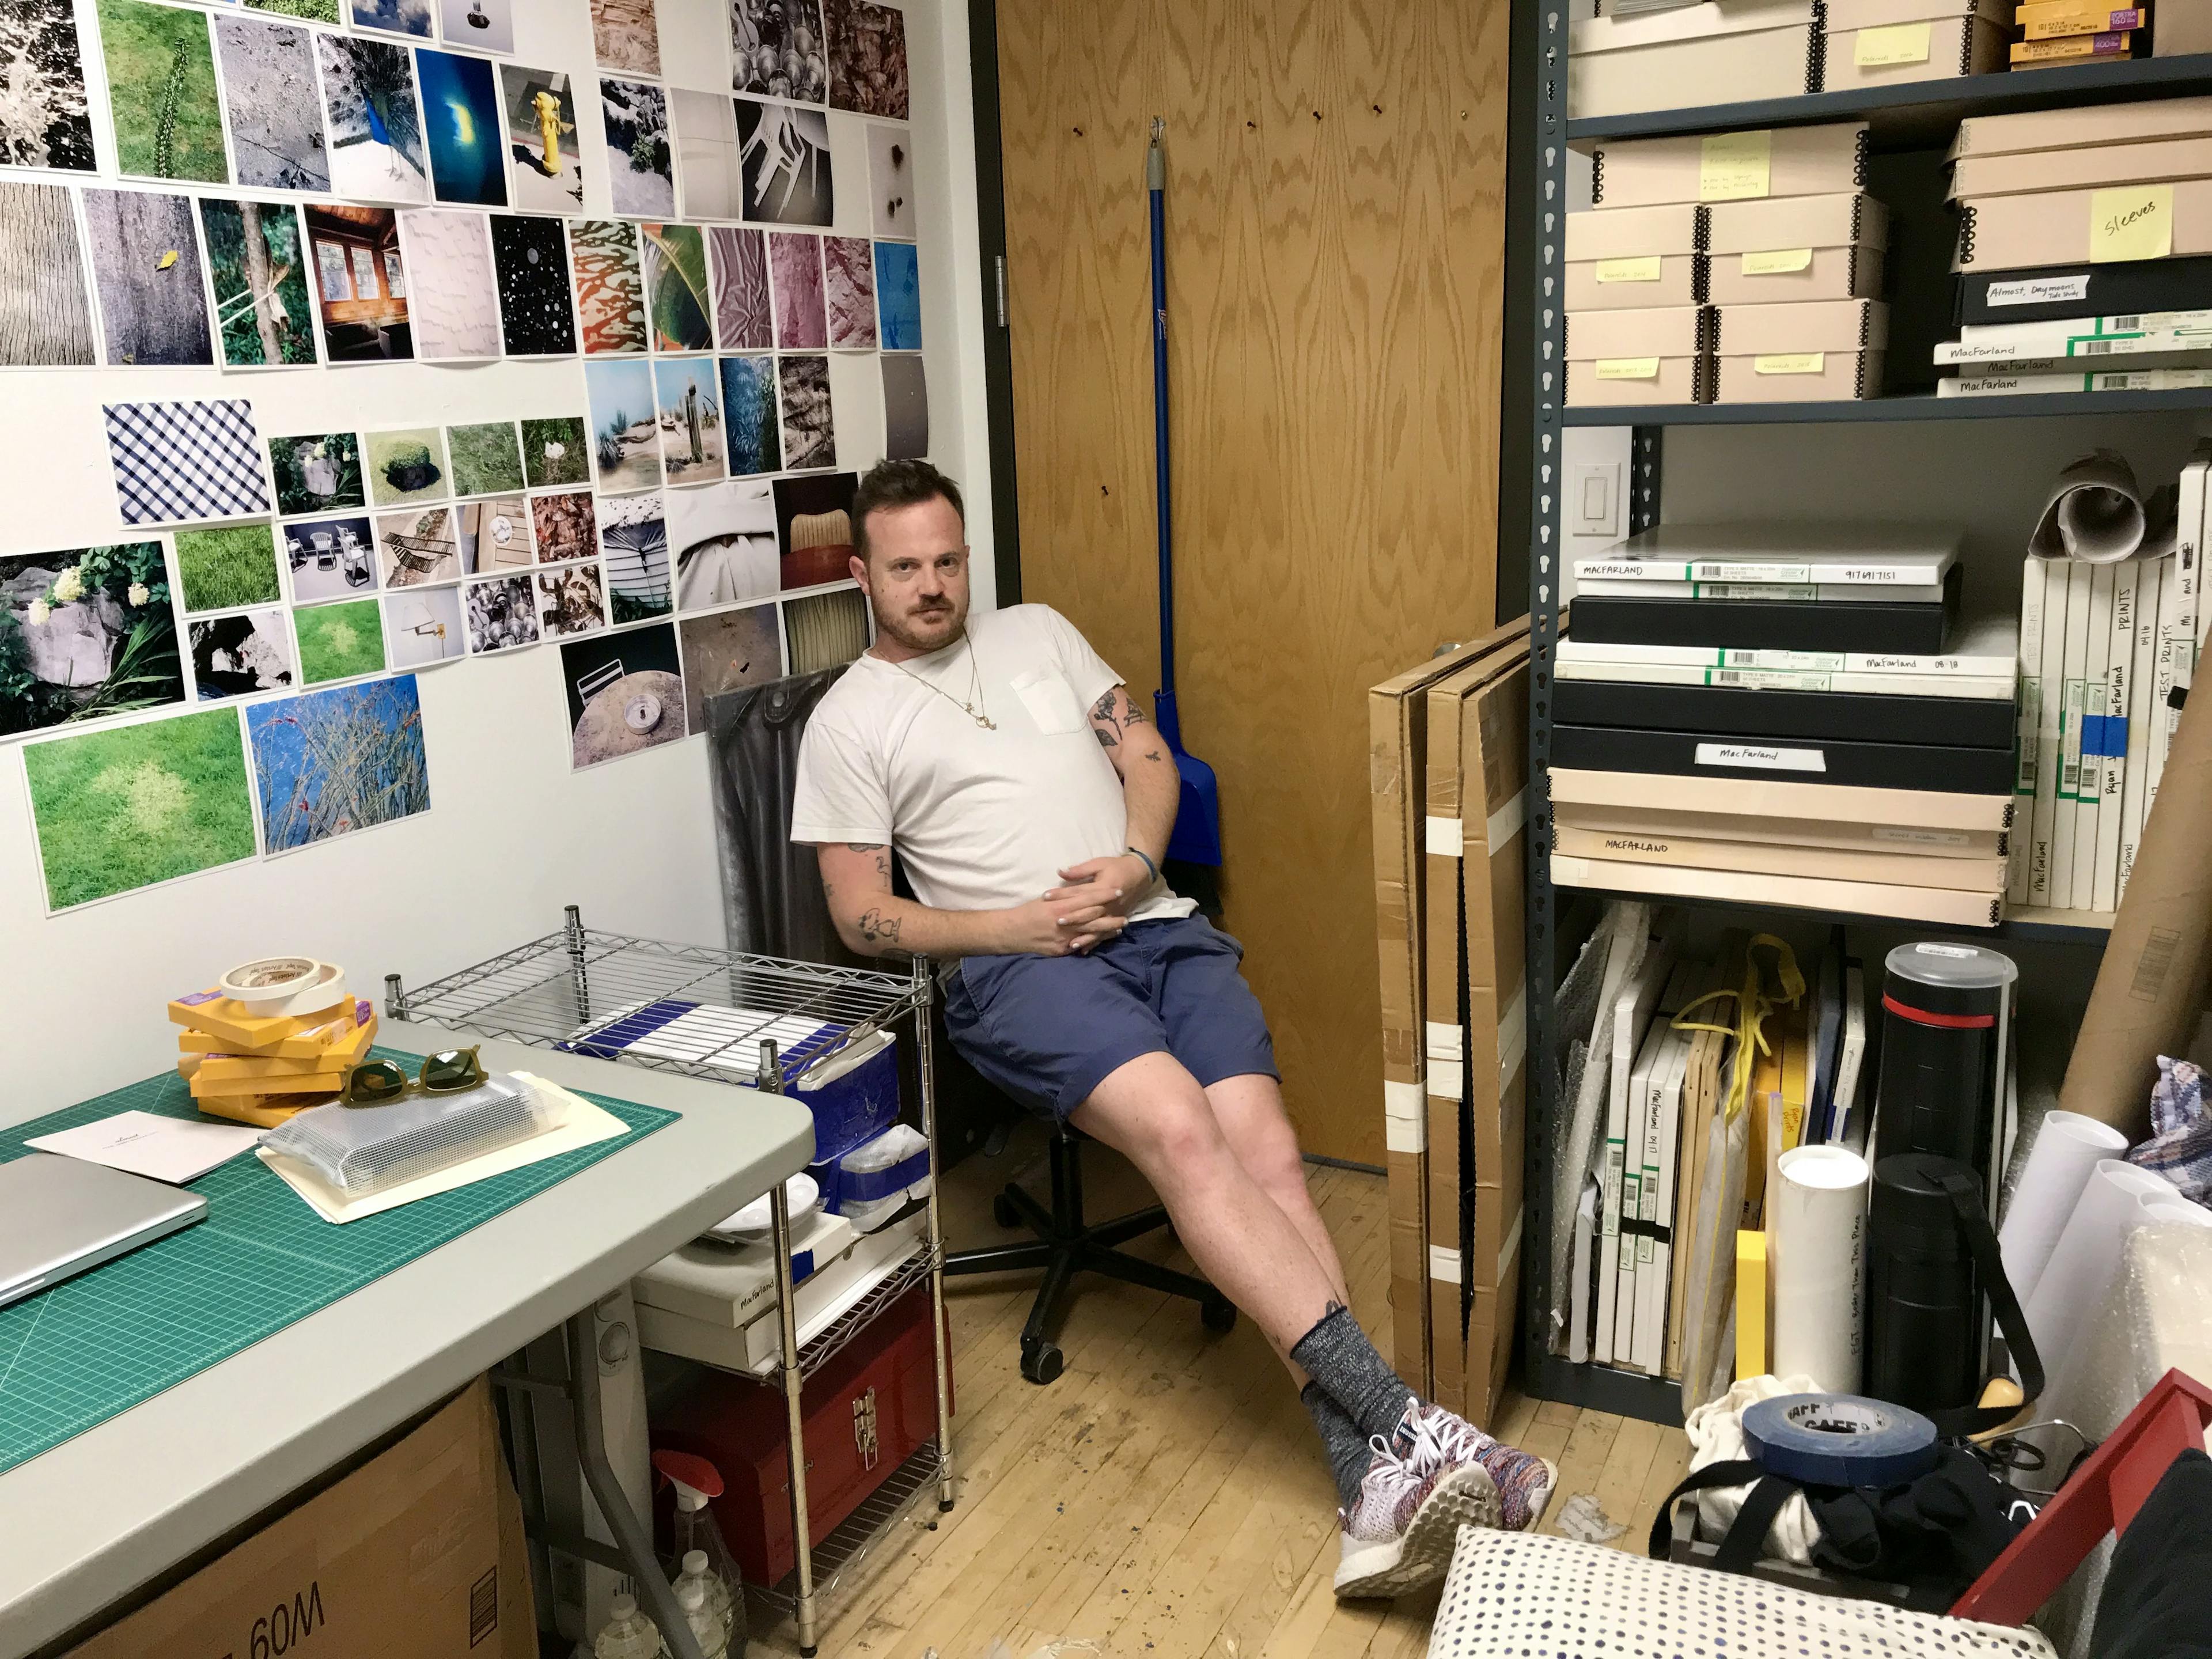 Artist Ryan James MacFarland sitting on a chair in his studio surrounded by his photographs pinned up in a grid on a white wall.